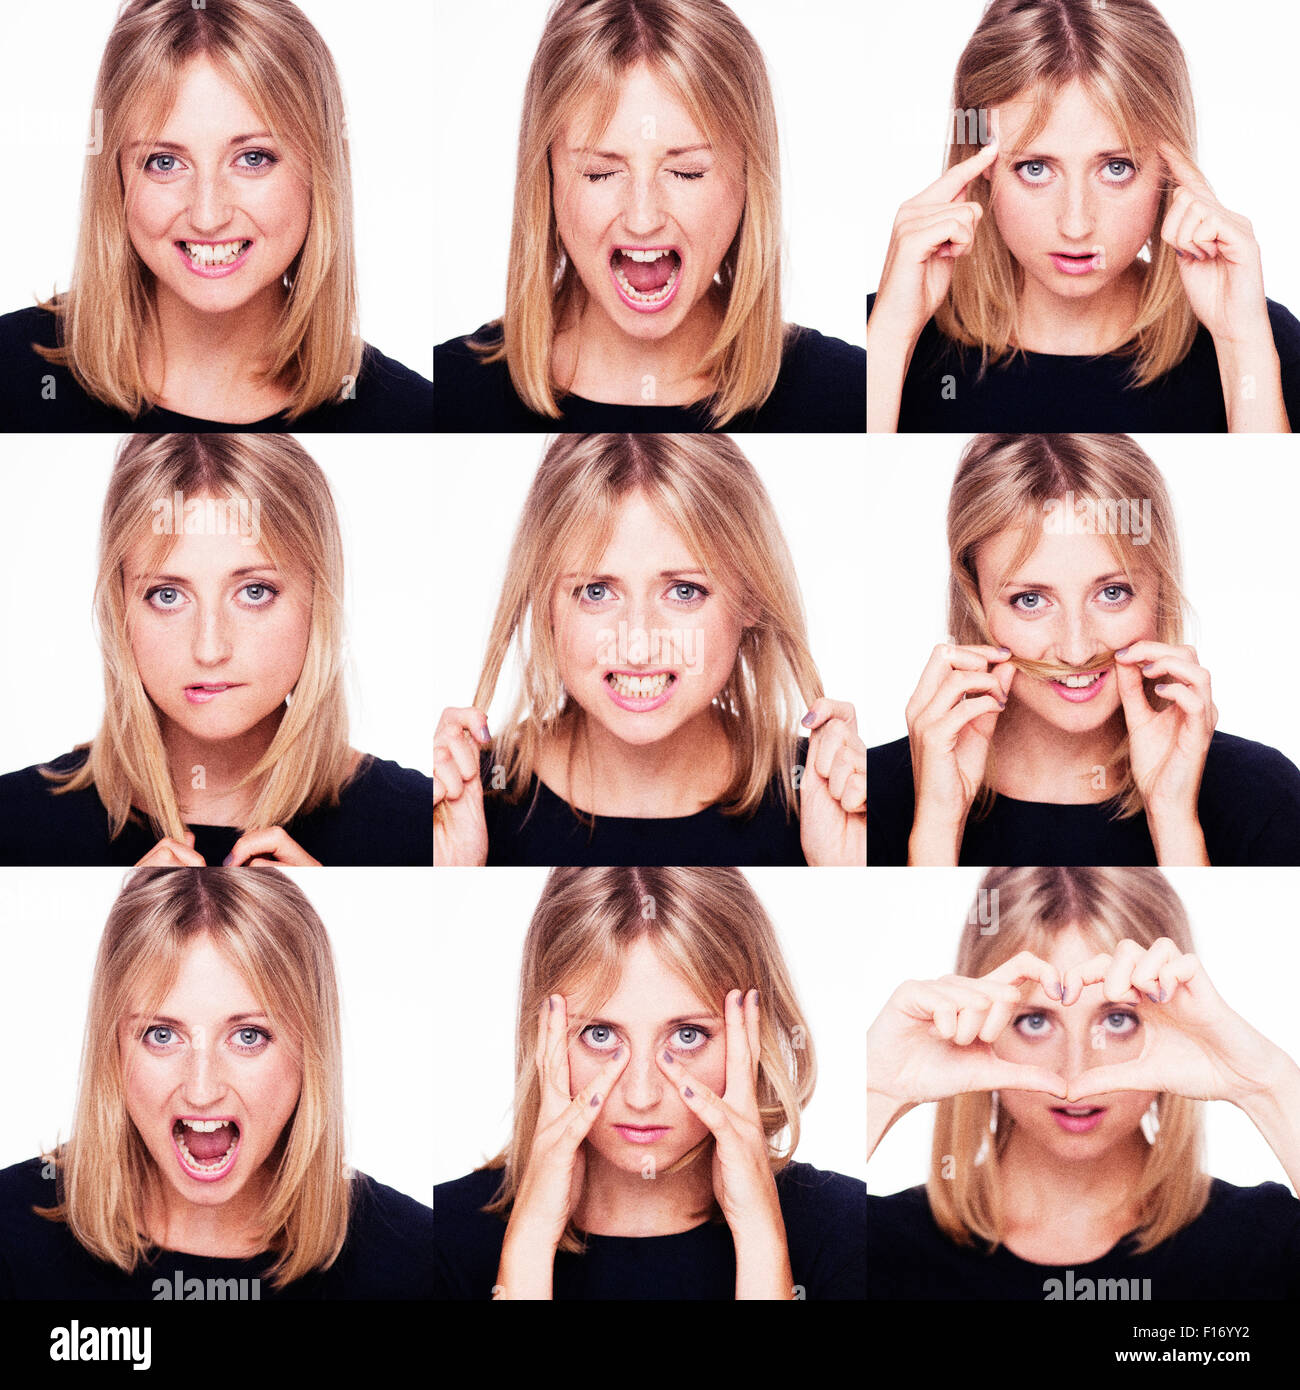 Blonde woman showing different emotions and expressions Stock Photo